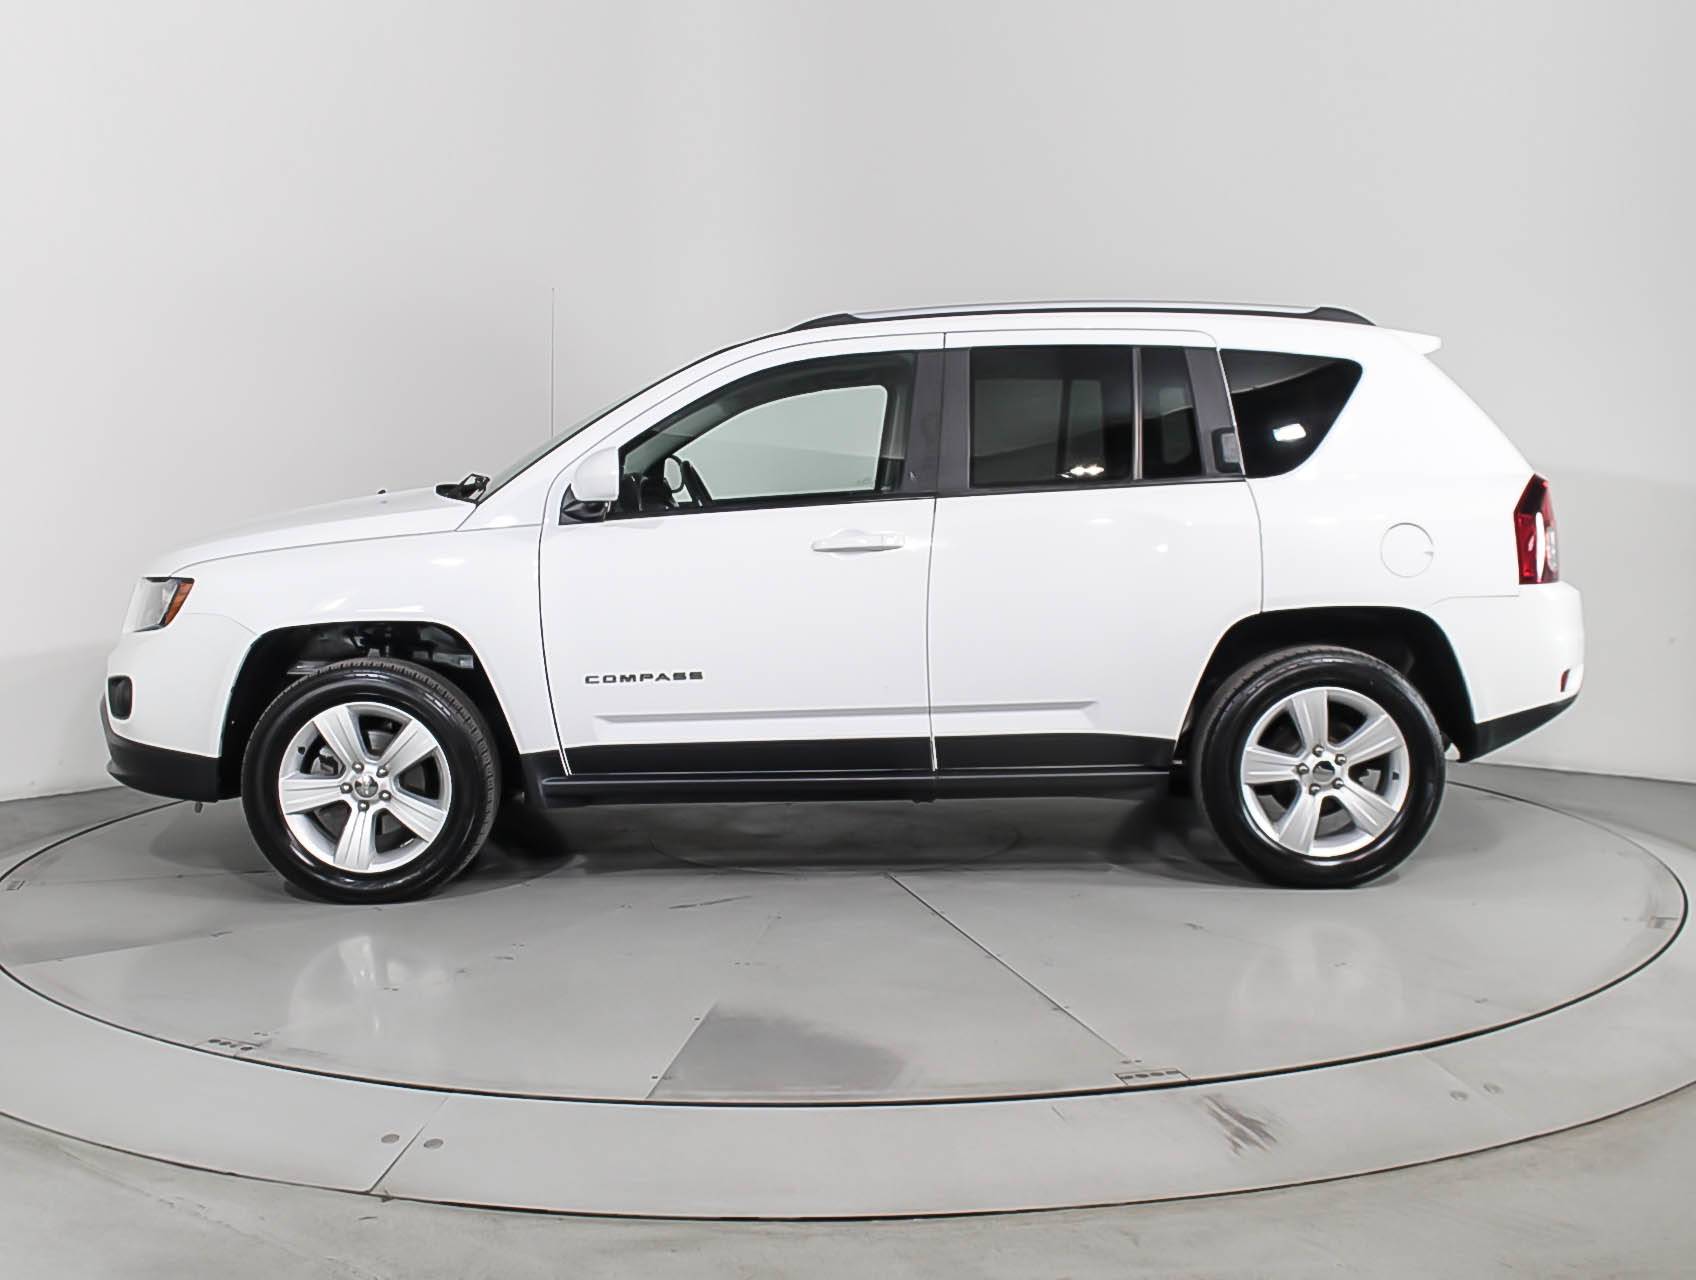 Used 2015 JEEP COMPASS Latitude 4x4 for sale in HOLLYWOOD | 96772